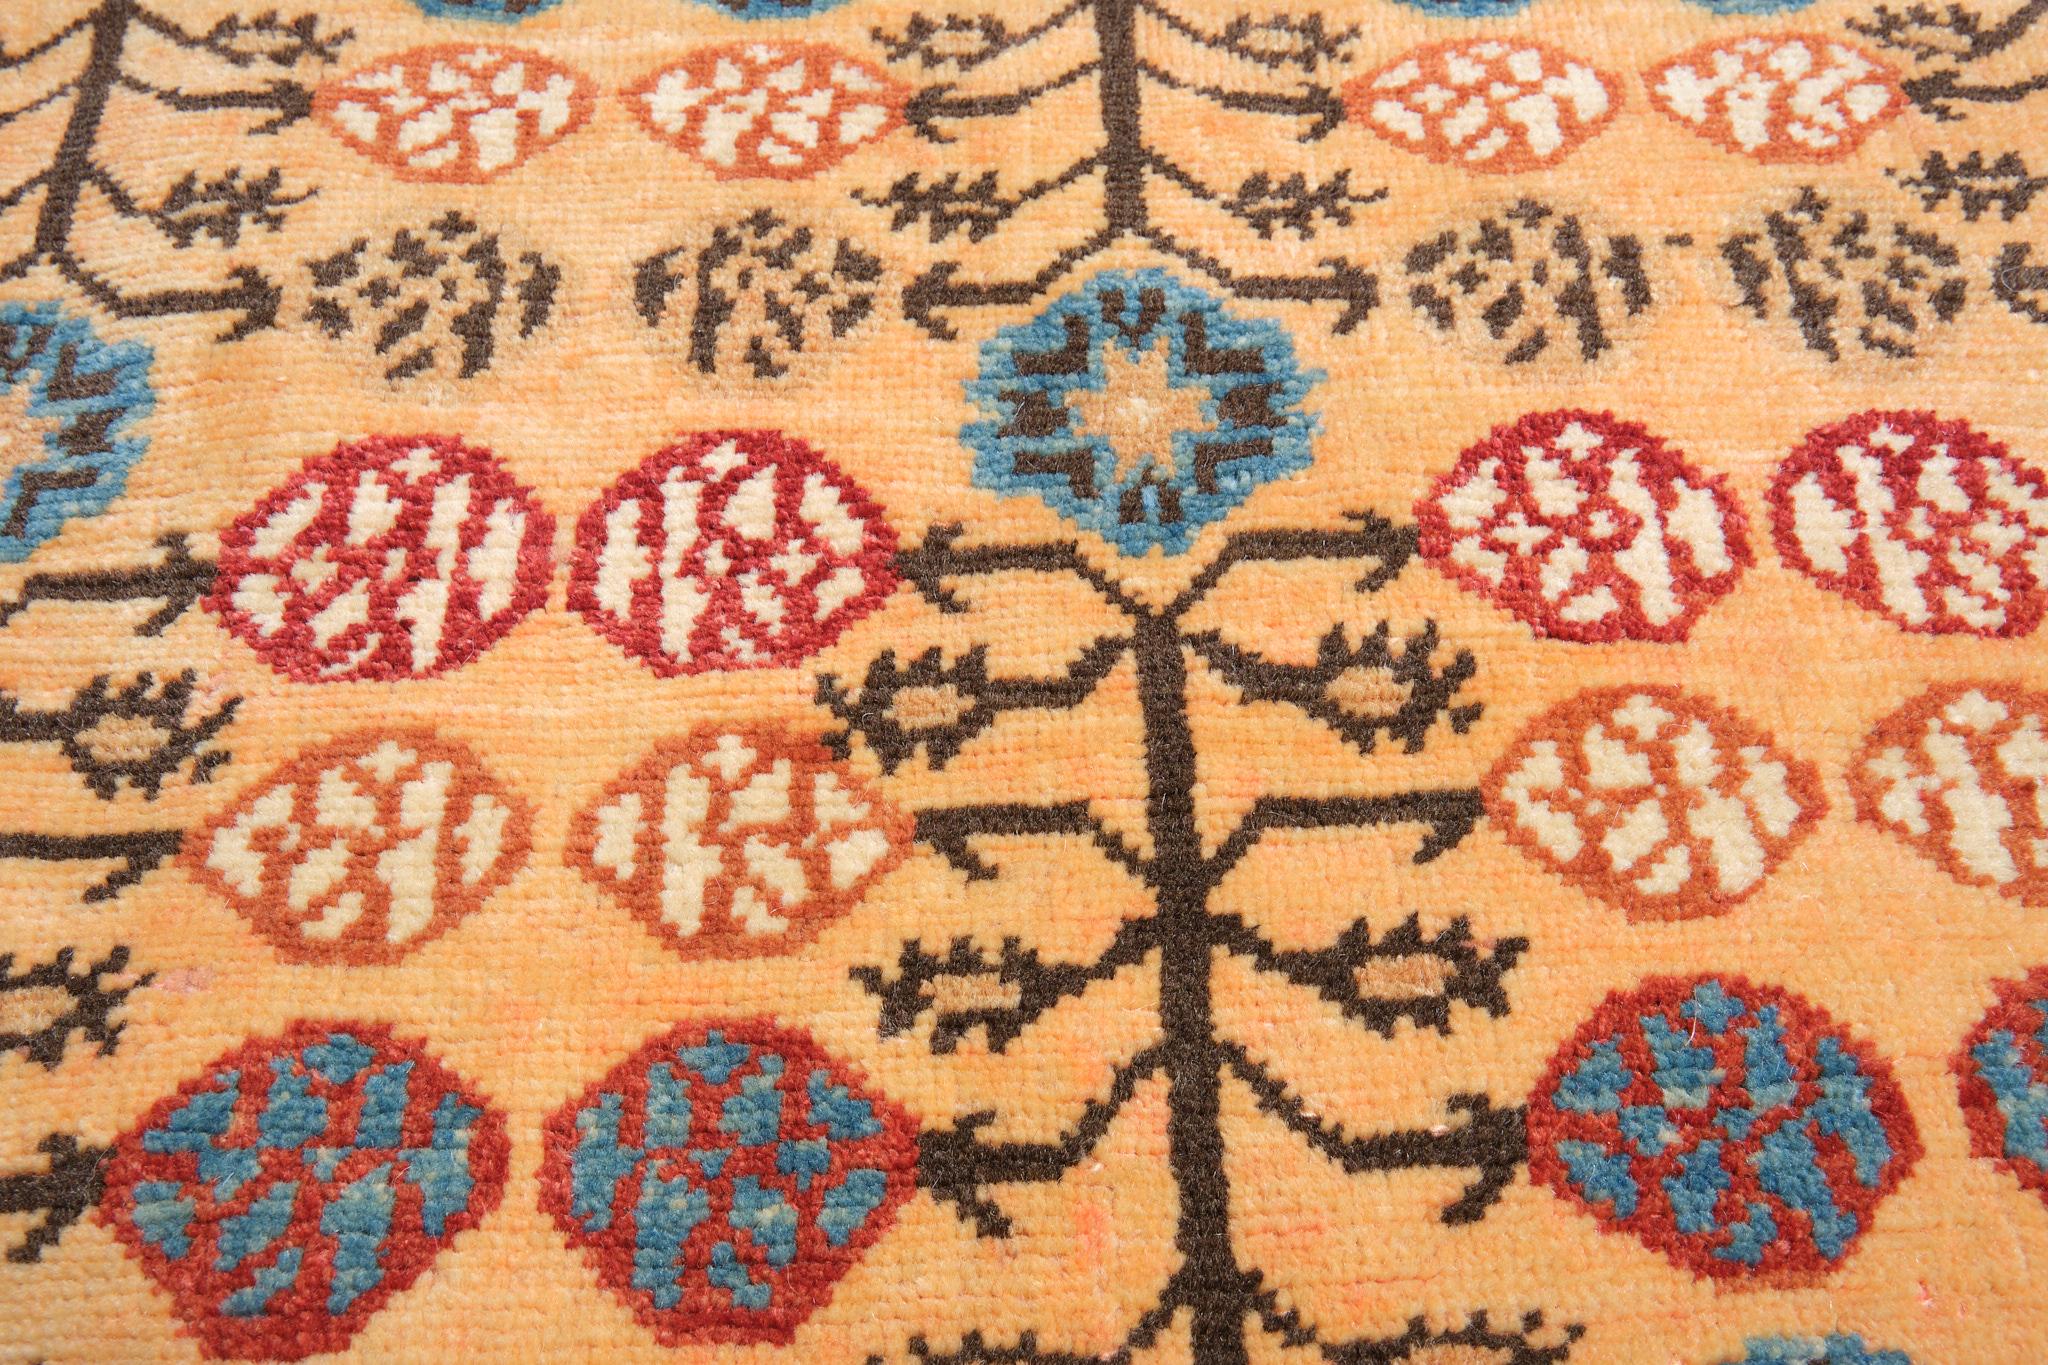 Vegetable Dyed Ararat Rugs Orange Ground Rug 17th Century Anatolian Revival Carpet Natural Dyed For Sale